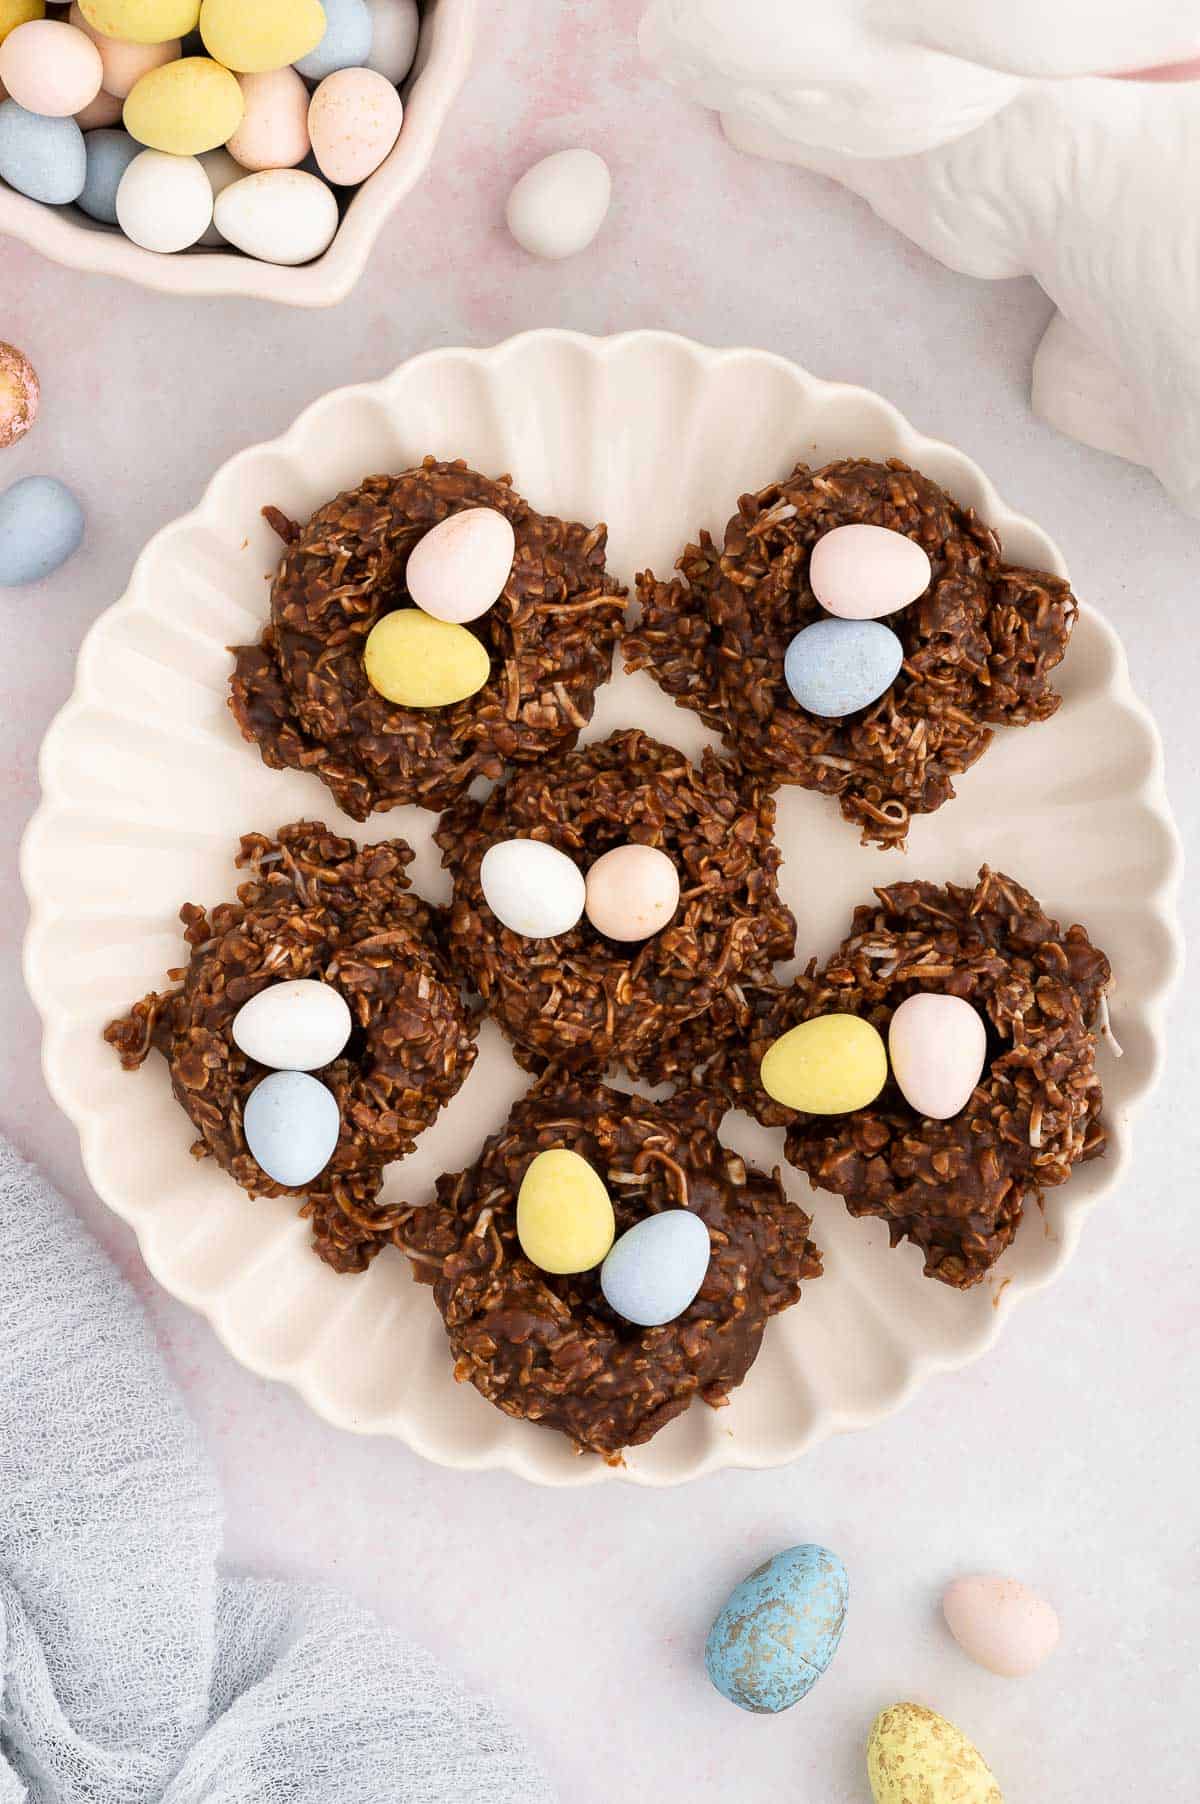 a plate of no bake birds nest cookies surrounded by a bowl of easter egg candies, a white ceramic bunny and more easter eggs